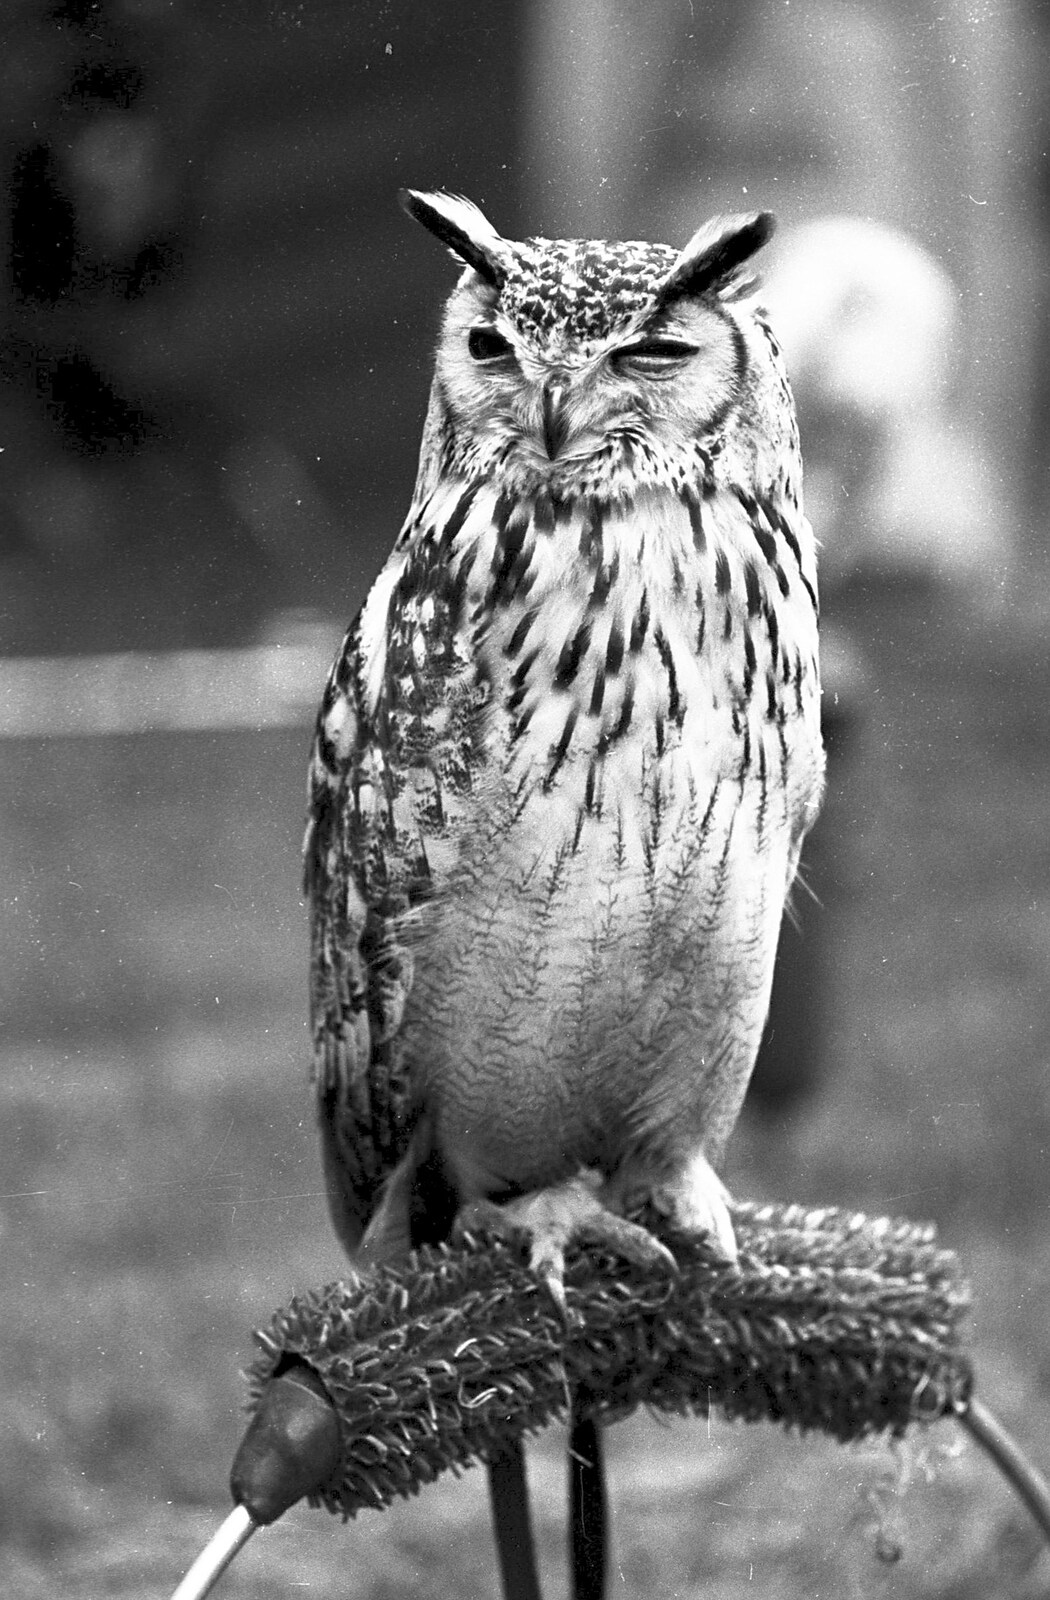 The Royal Norfolk Show, Costessey, Norwich - June 20th 1994: An owl scopes around